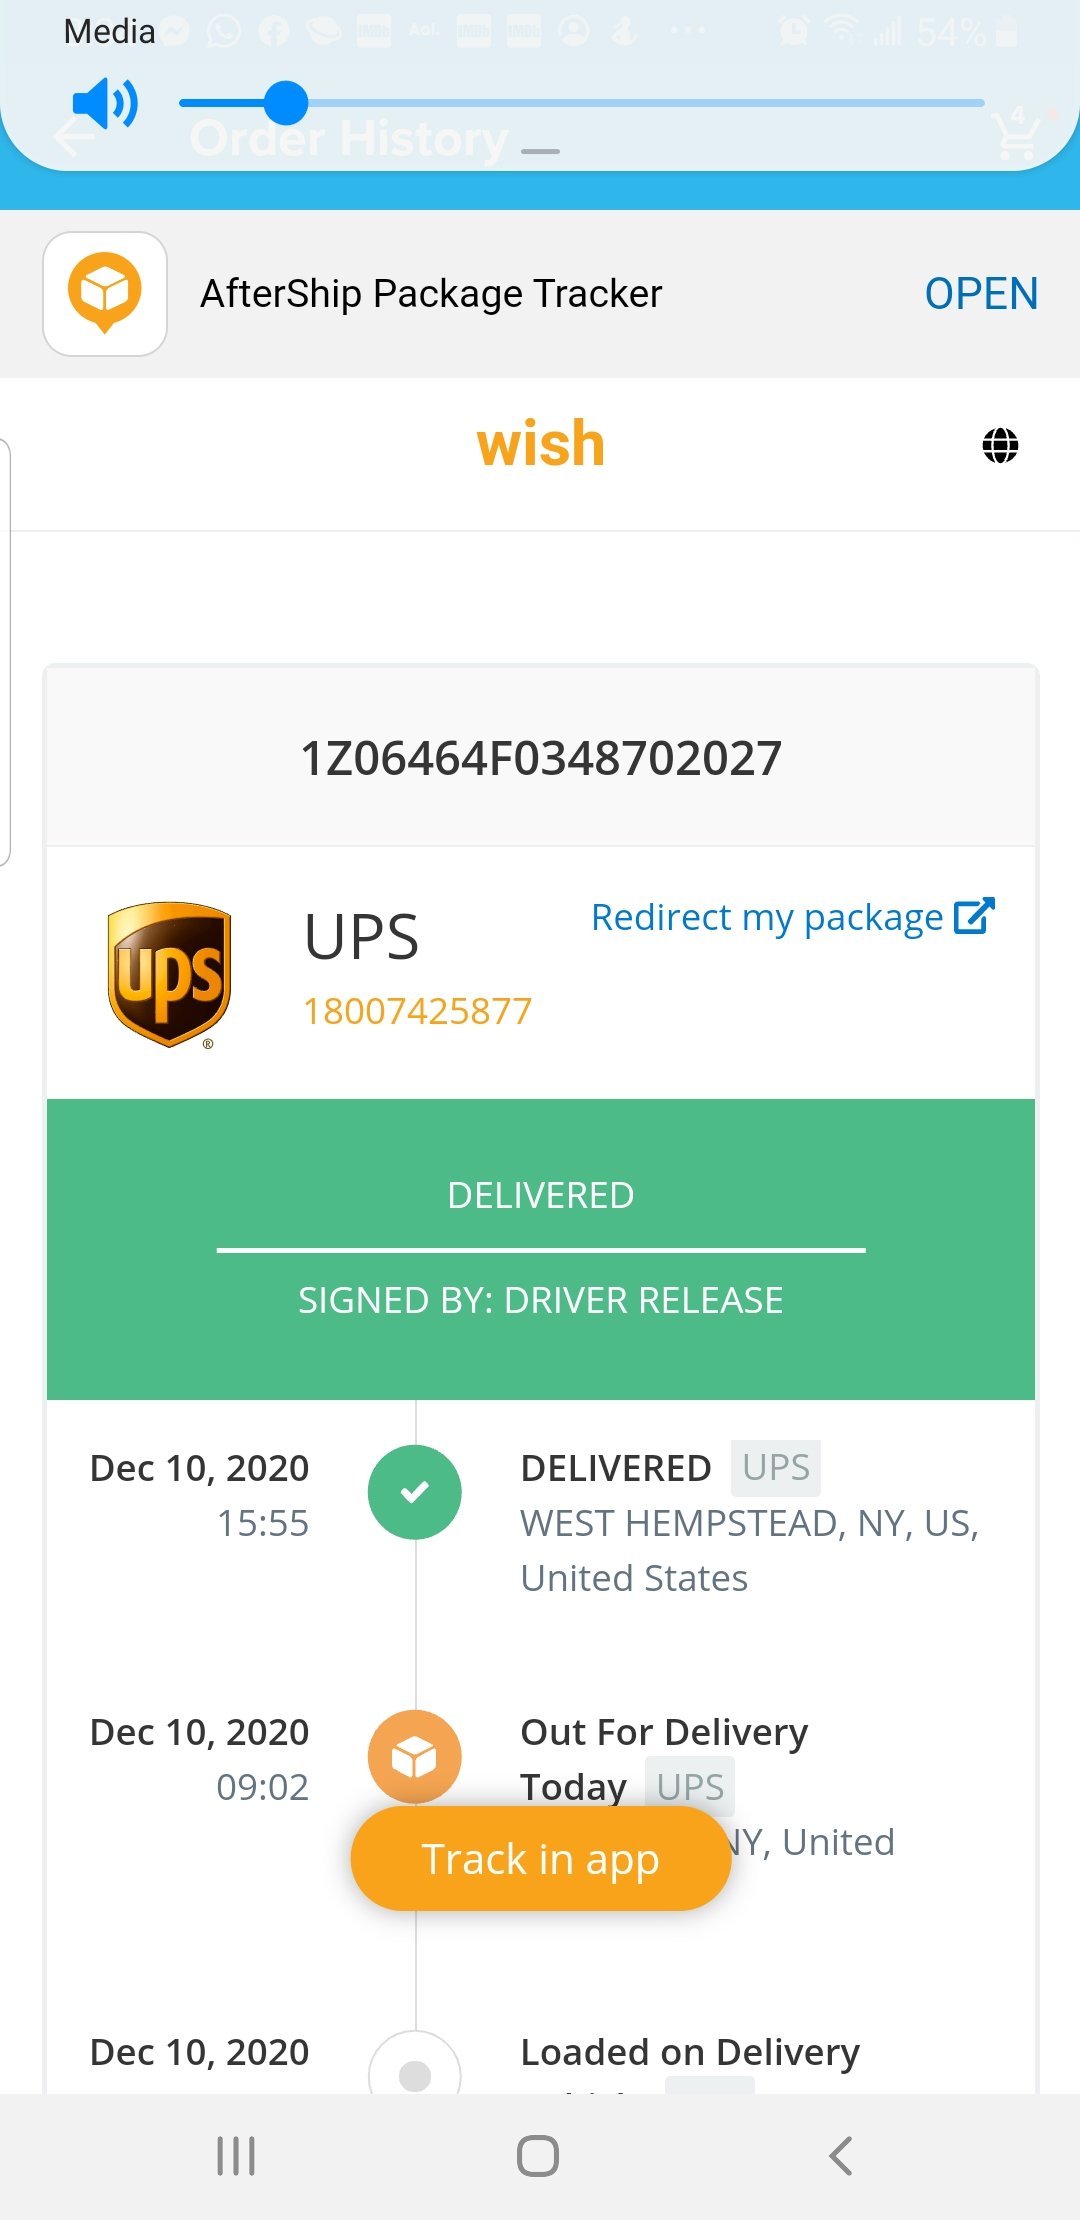 Wish complaint Never received package - sent to different person